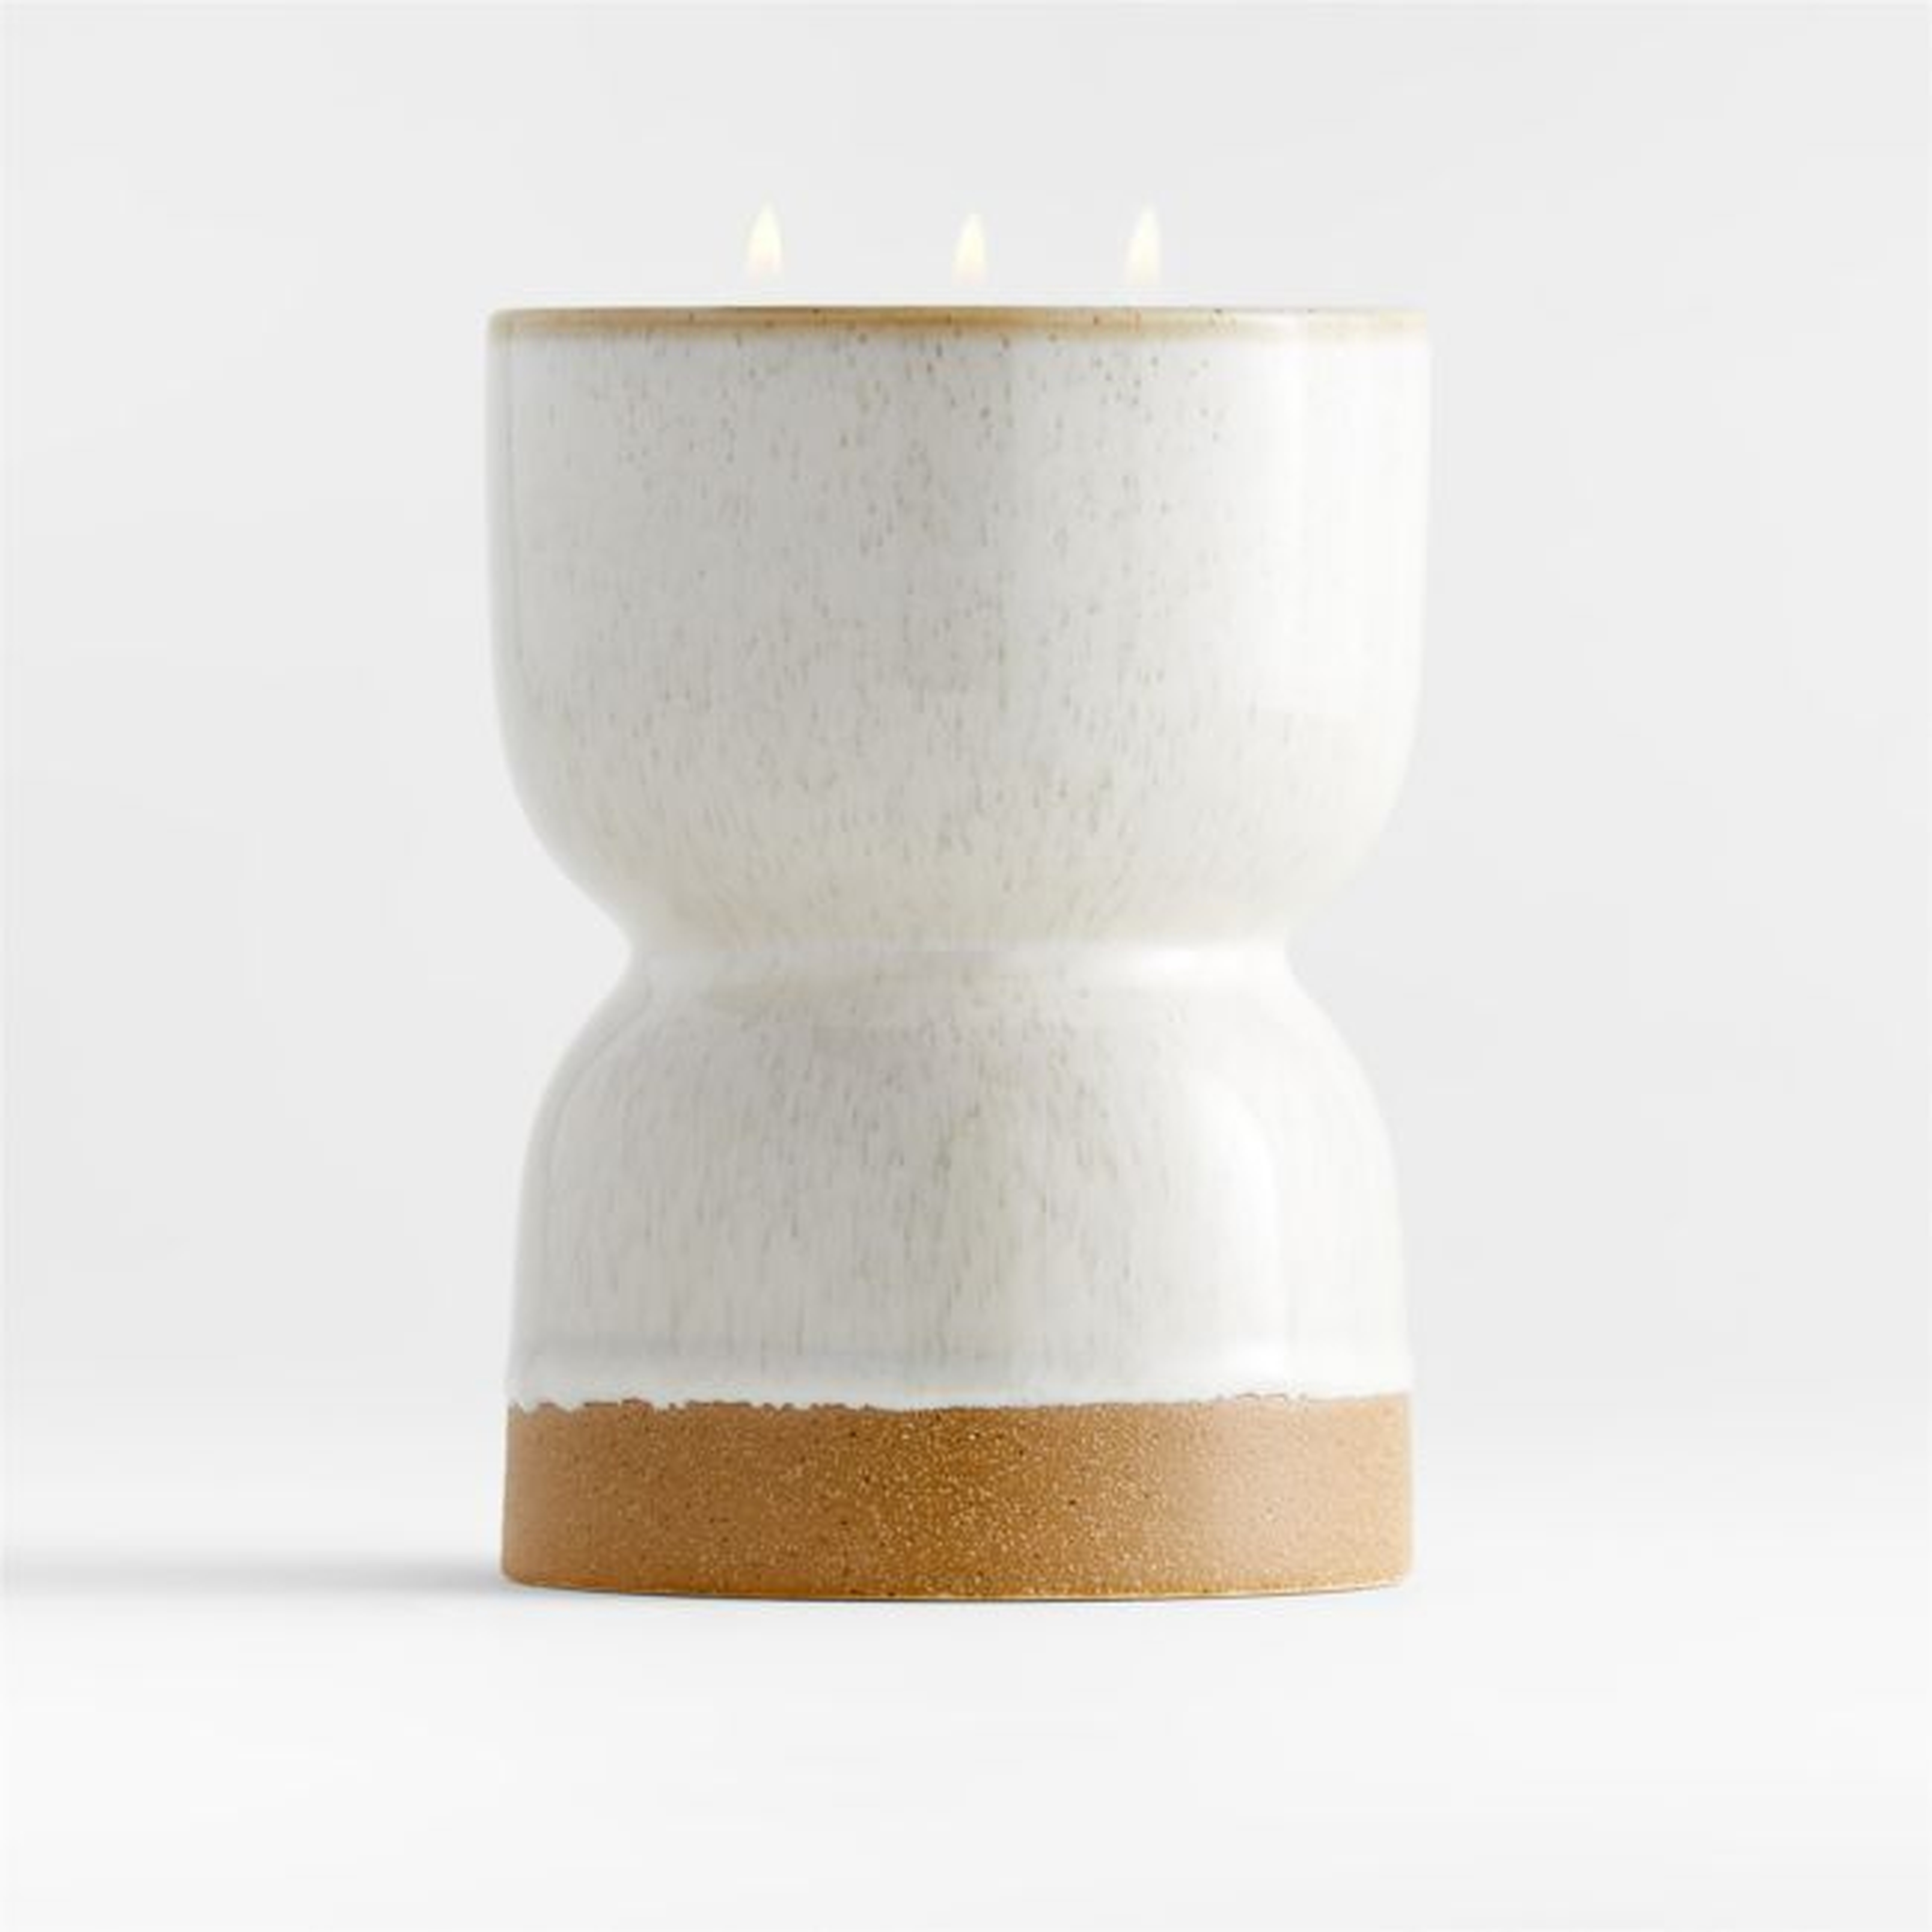 Mandarin, Frankincense, Clove 3 Wick Scented Candle - Crate and Barrel